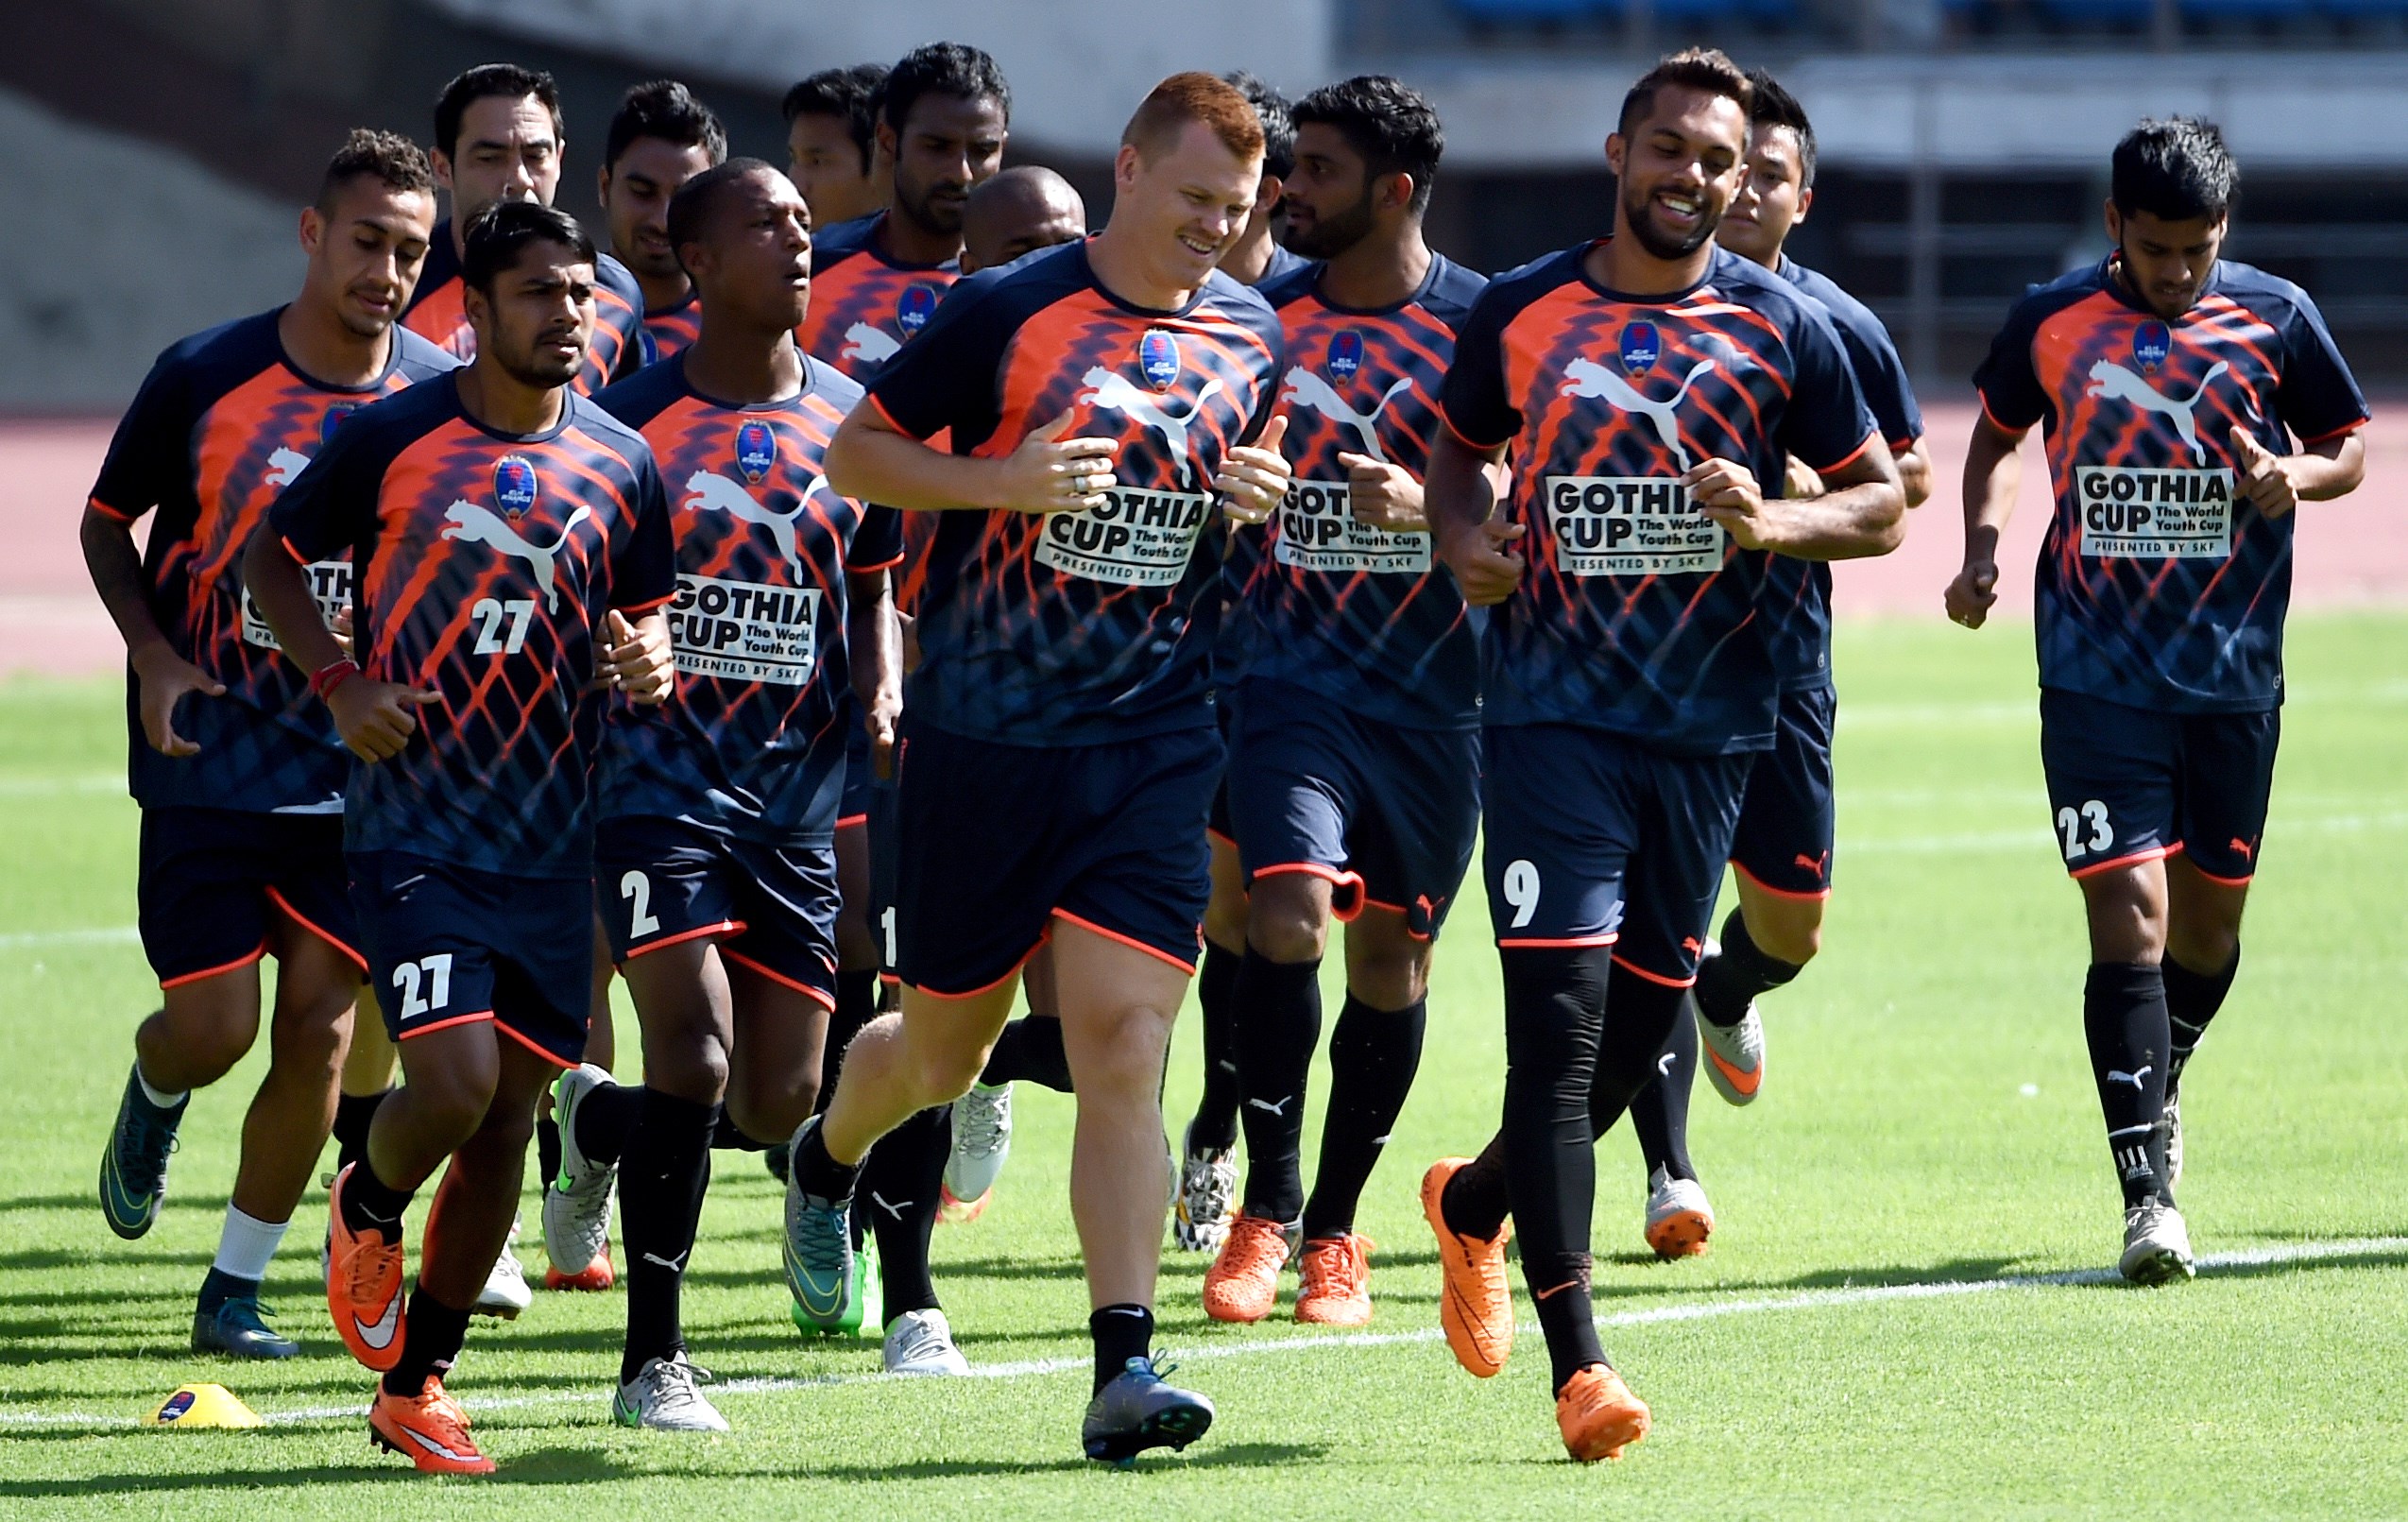 TO GO WITH FBL-IND-INDIA-ISL, FOCUS BY PETER HUTCHINSON

In this photograph taken on September 30, 2015, Delhi Dynamos FC players jog as they warm up in a training session at the Jawaharlal Nehru Stadium in New Delhi.   India's glitzy super league returns this weekend, but a struggling national team and insufficient facilities in the cricket-mad country means the "sleeping giant" of world football is unlikely to stir anytime soon.   AFP PHOTO / MONEY SHARMA        (Photo credit should read MONEY SHARMA/AFP/Getty Images)